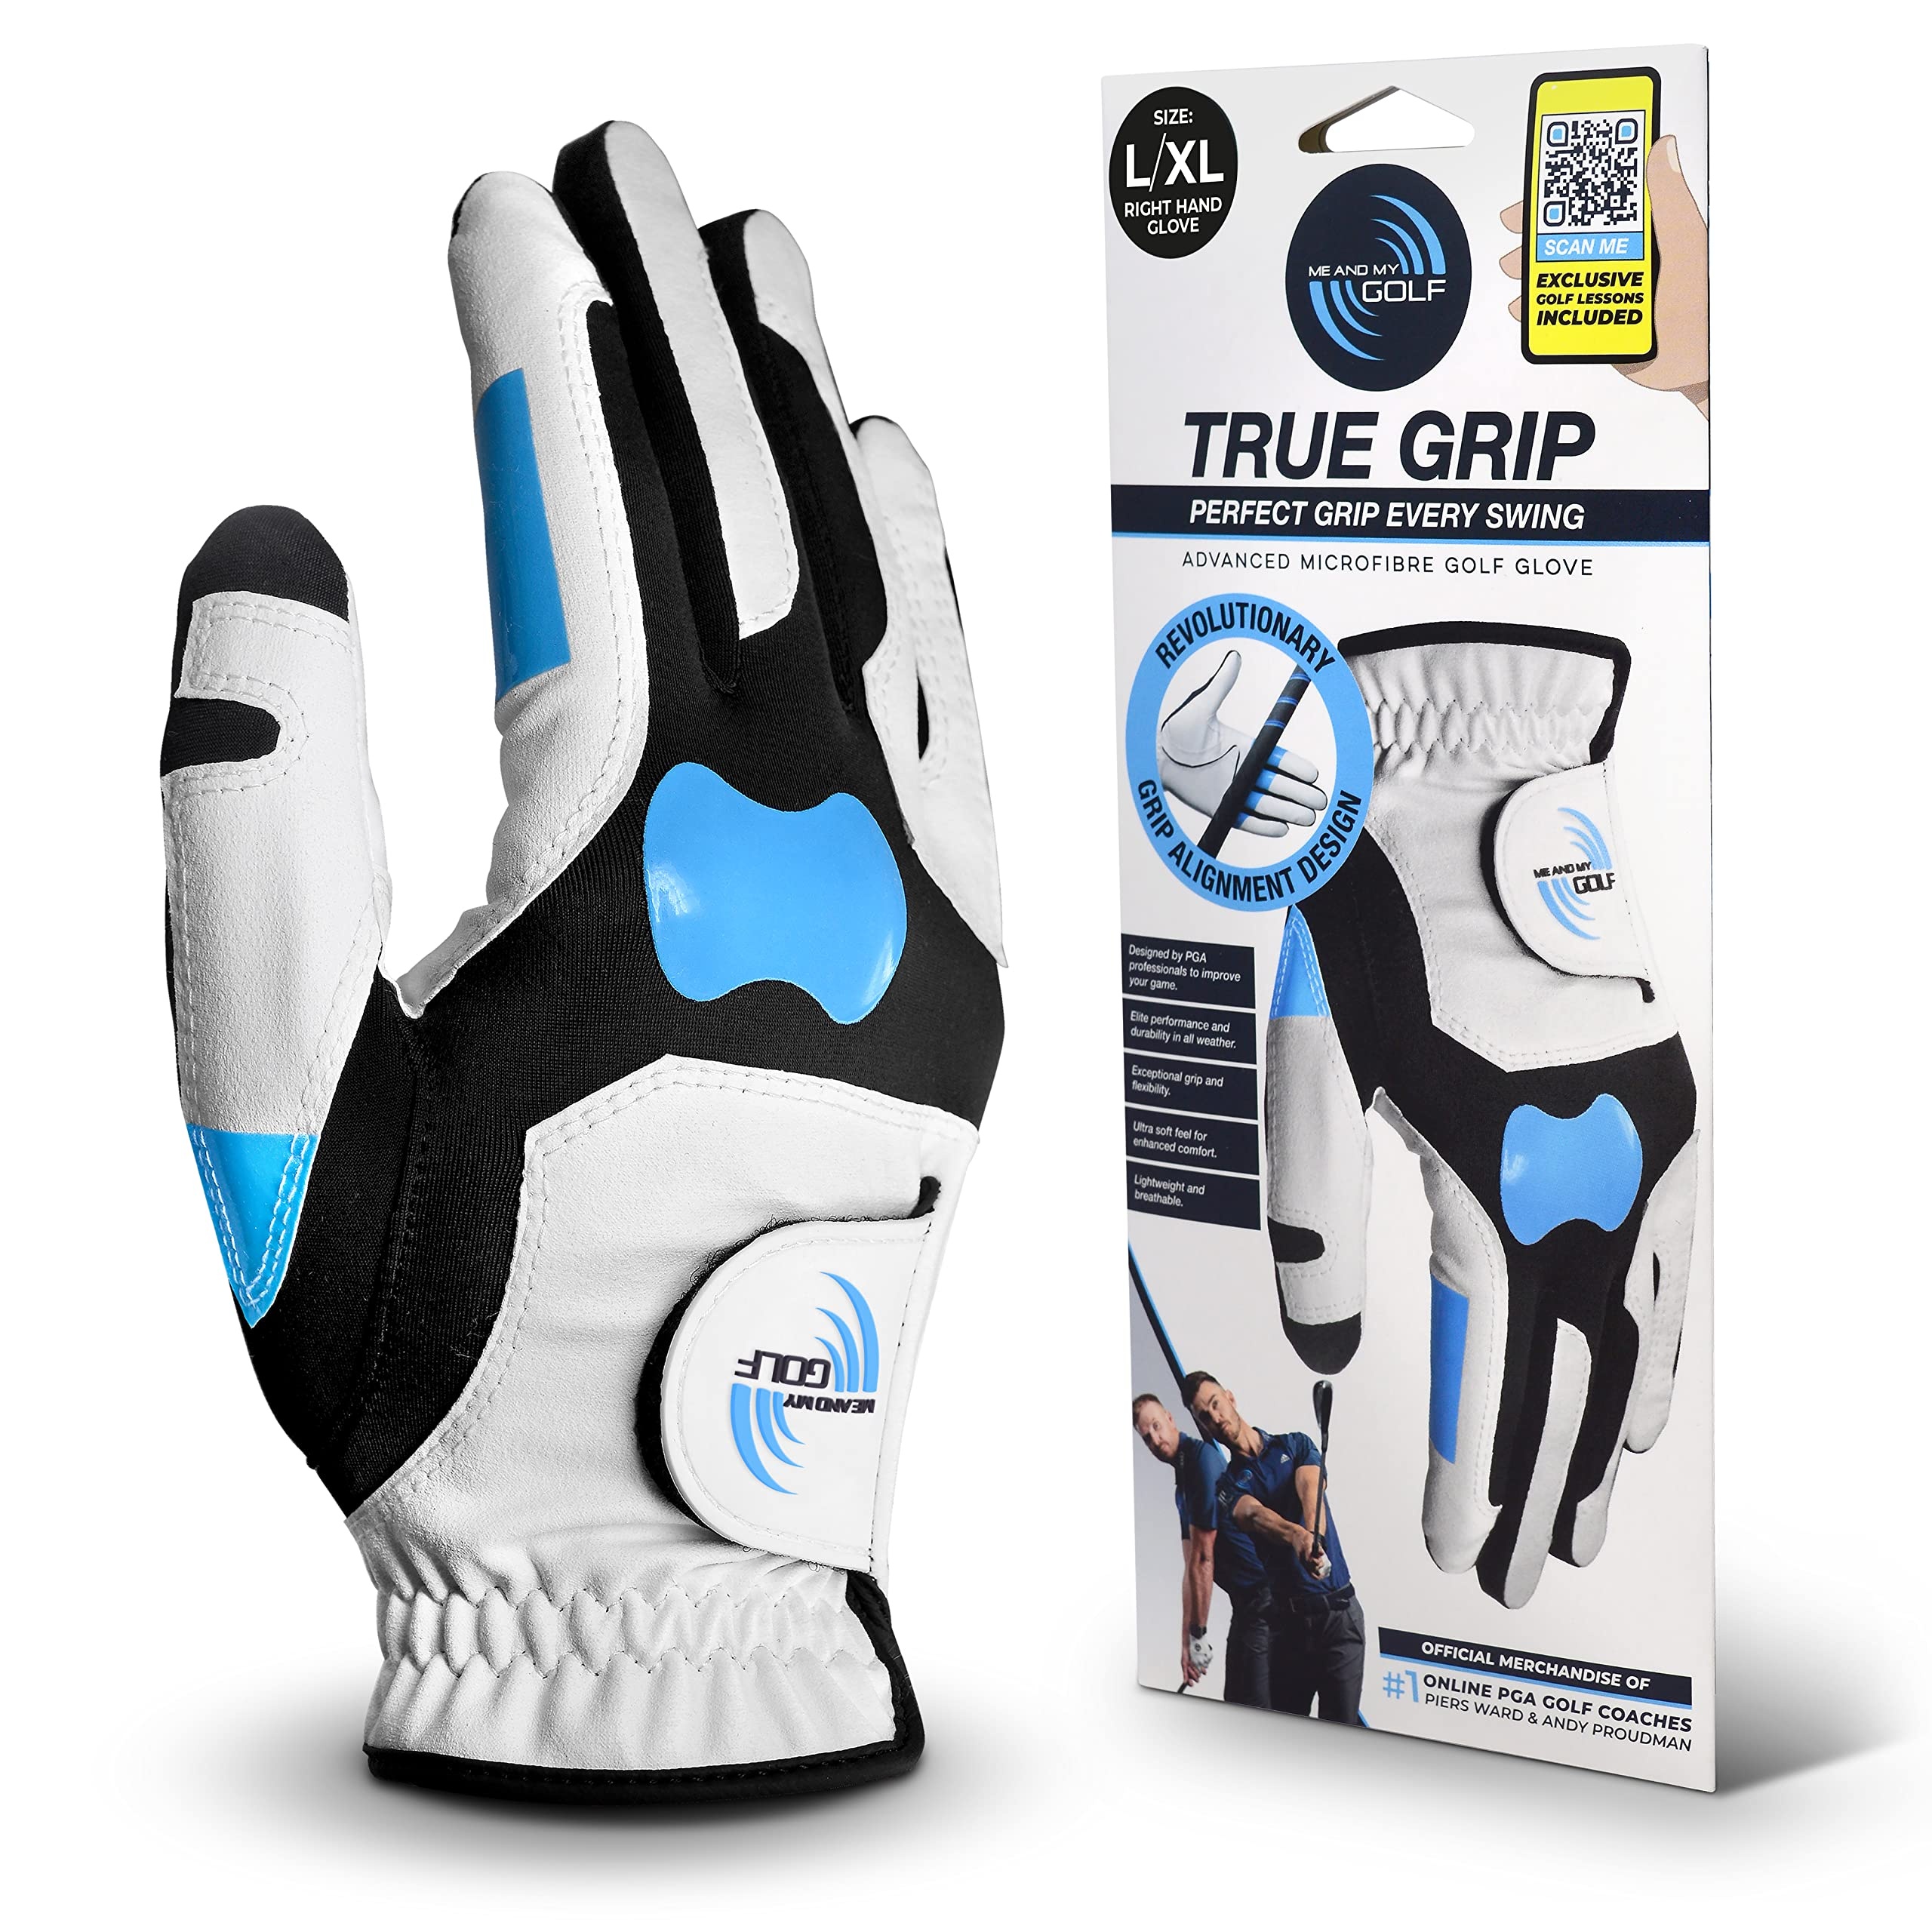 ME AND MY GOLF True Grip Training Golf Glove - Perfect Grip Every Swing - Size L/XL Right Hand